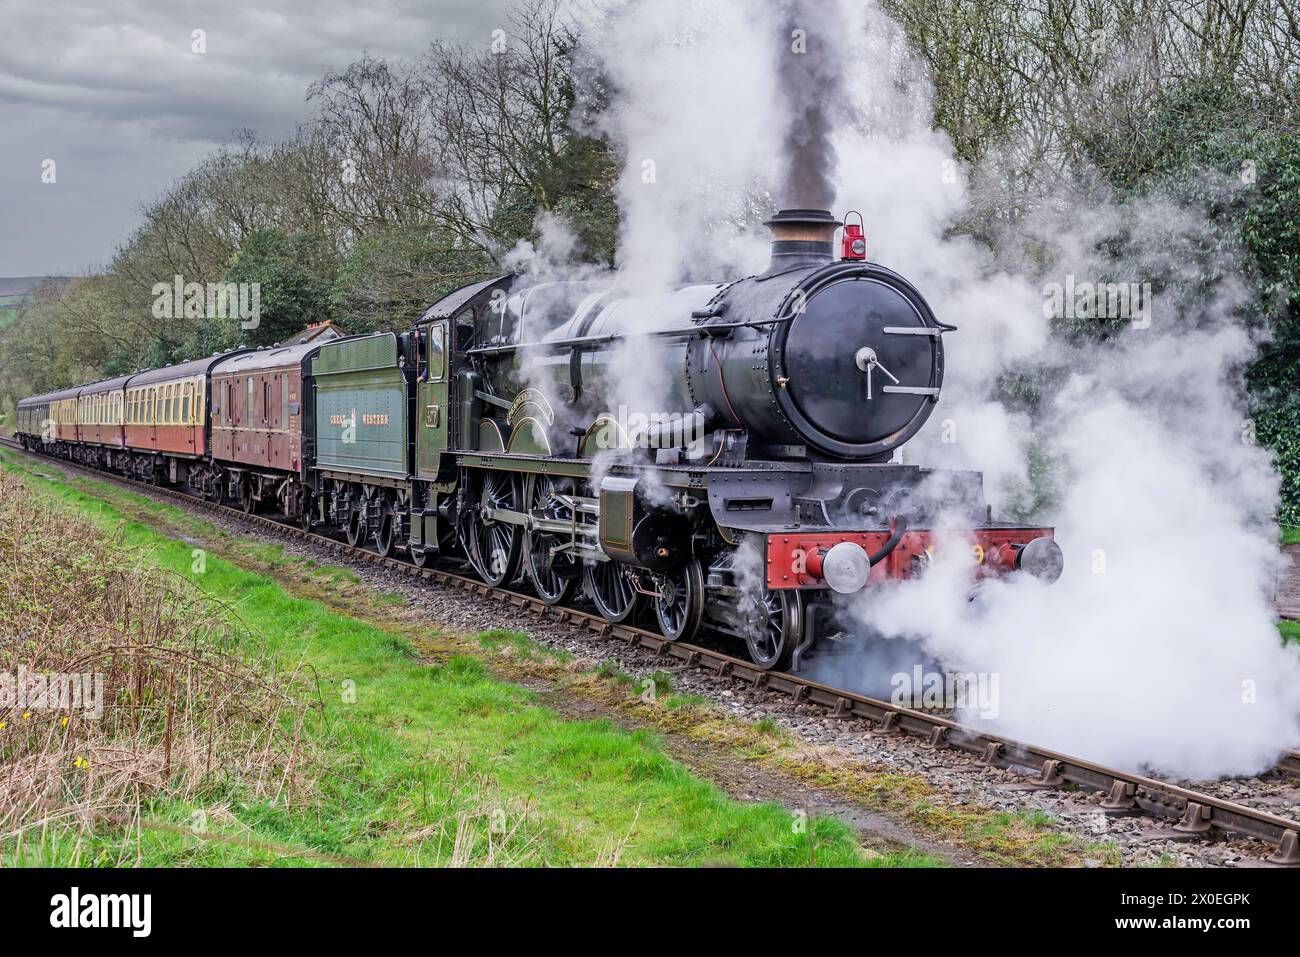 GWR 4073 `Castle` Class N0.4079 Pendennis Castle 4-6-0 Steam Locomotive Built in 1924 for Great Western Railway on the East Lancashire Railway network Stock Photo